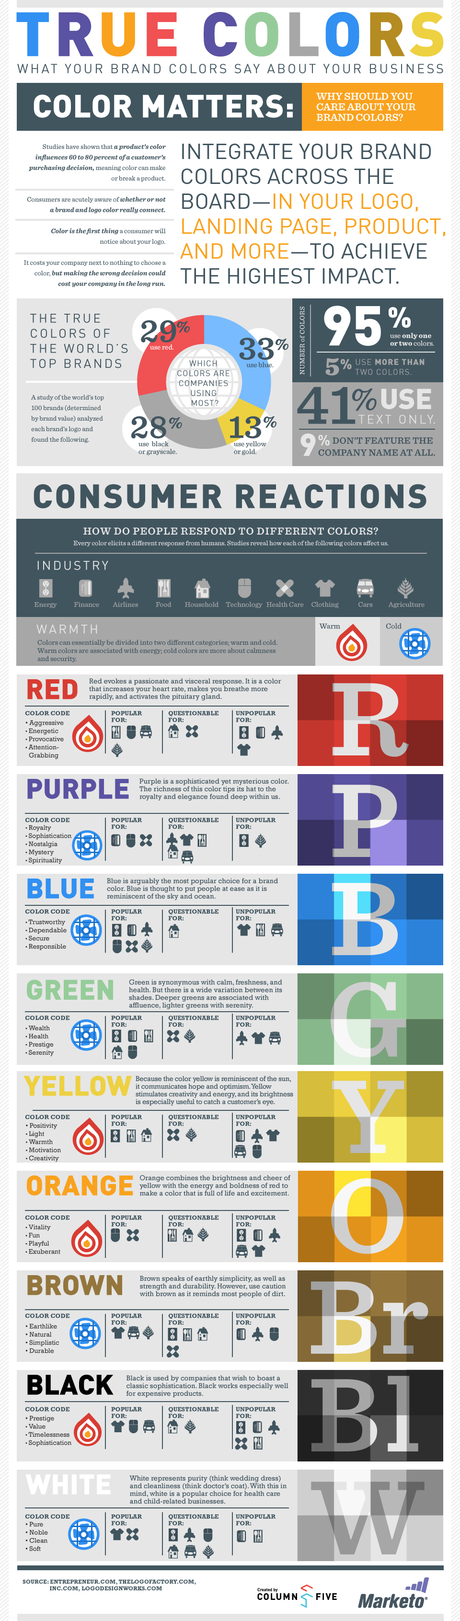 Infographic on What Your Brand Colors Say About Your Business